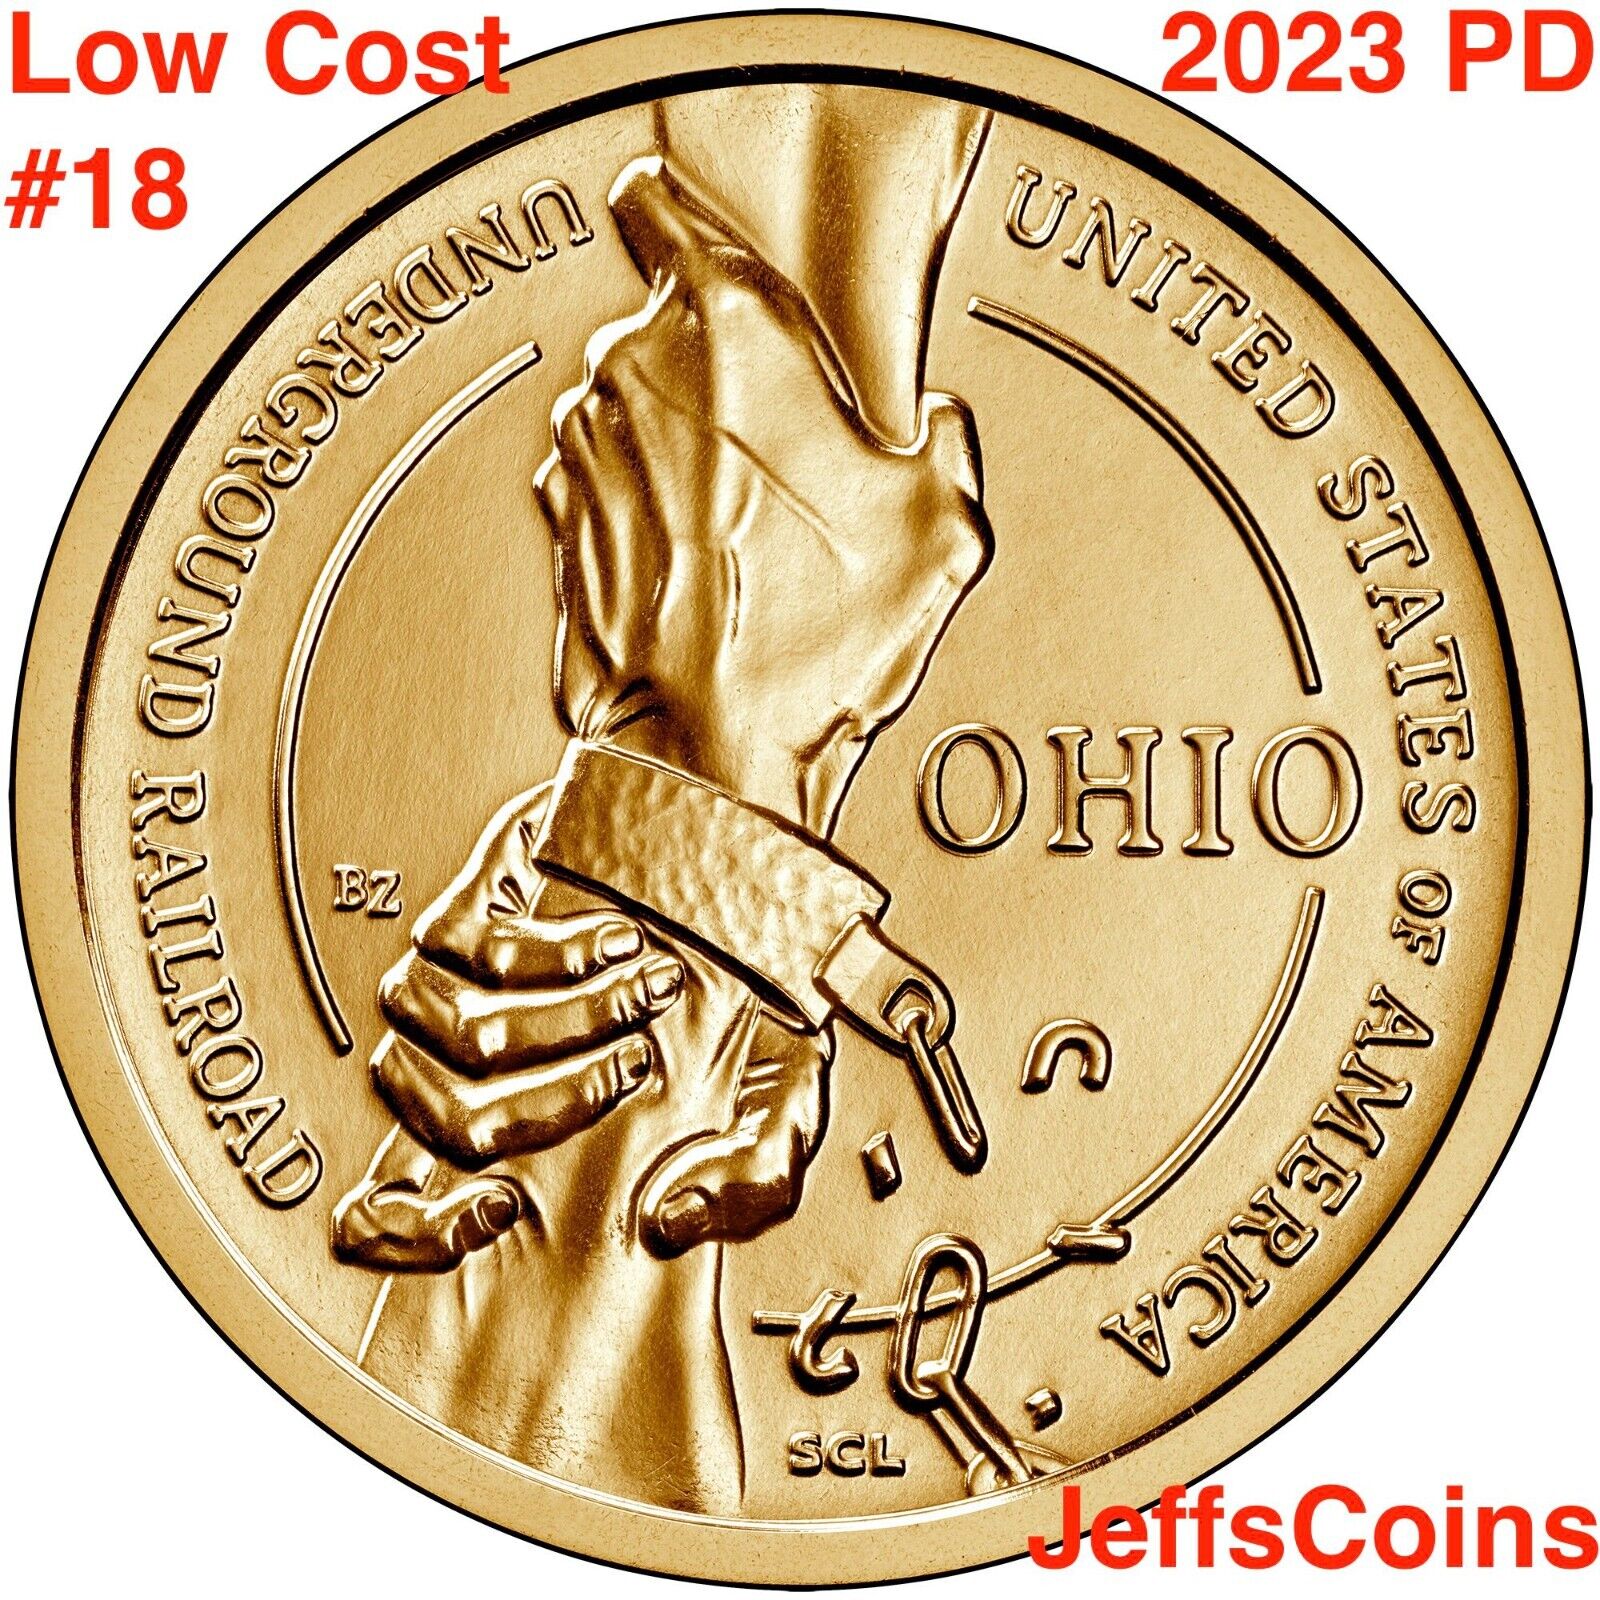 2023 PD Innovation Dollars All 8 Set OH IN LA MS Low Cost P D Railroad to Lung $ Без бренда - фотография #5